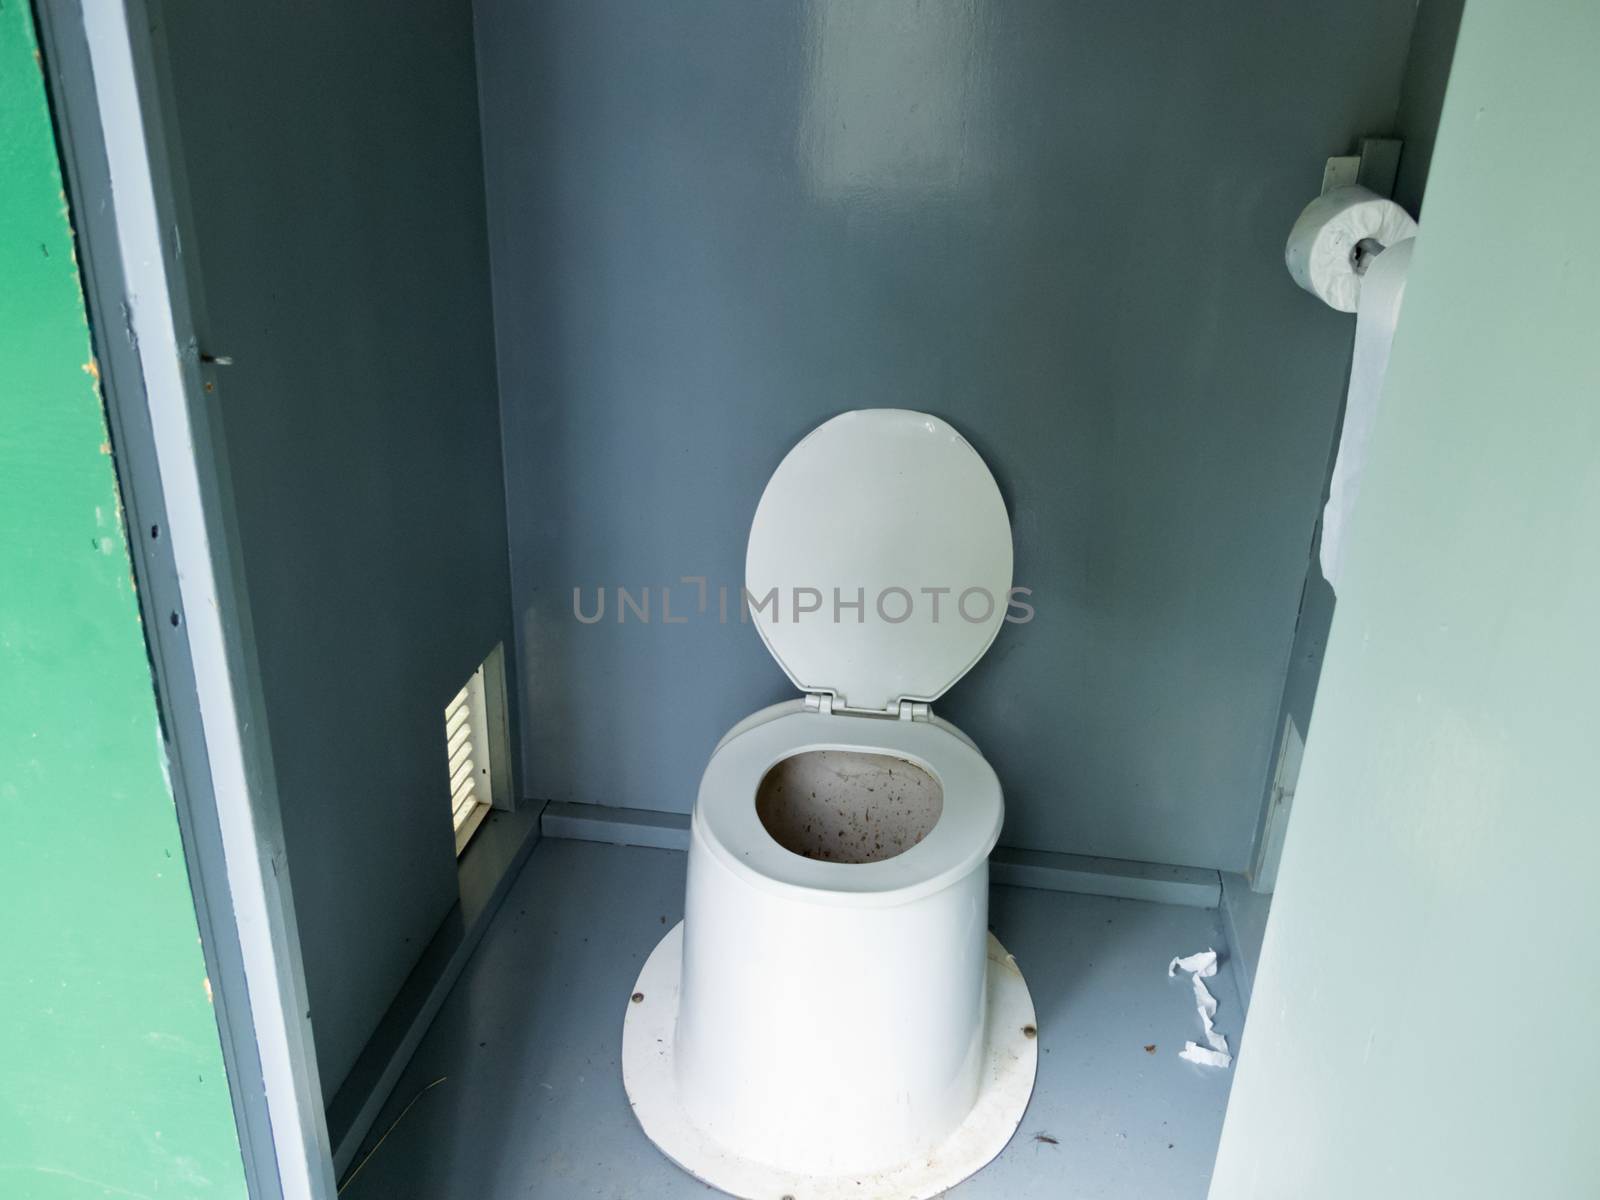 Campground pit toilet outhouse inside white plastic toilet and dirty interior to the toilet bowl with open lid